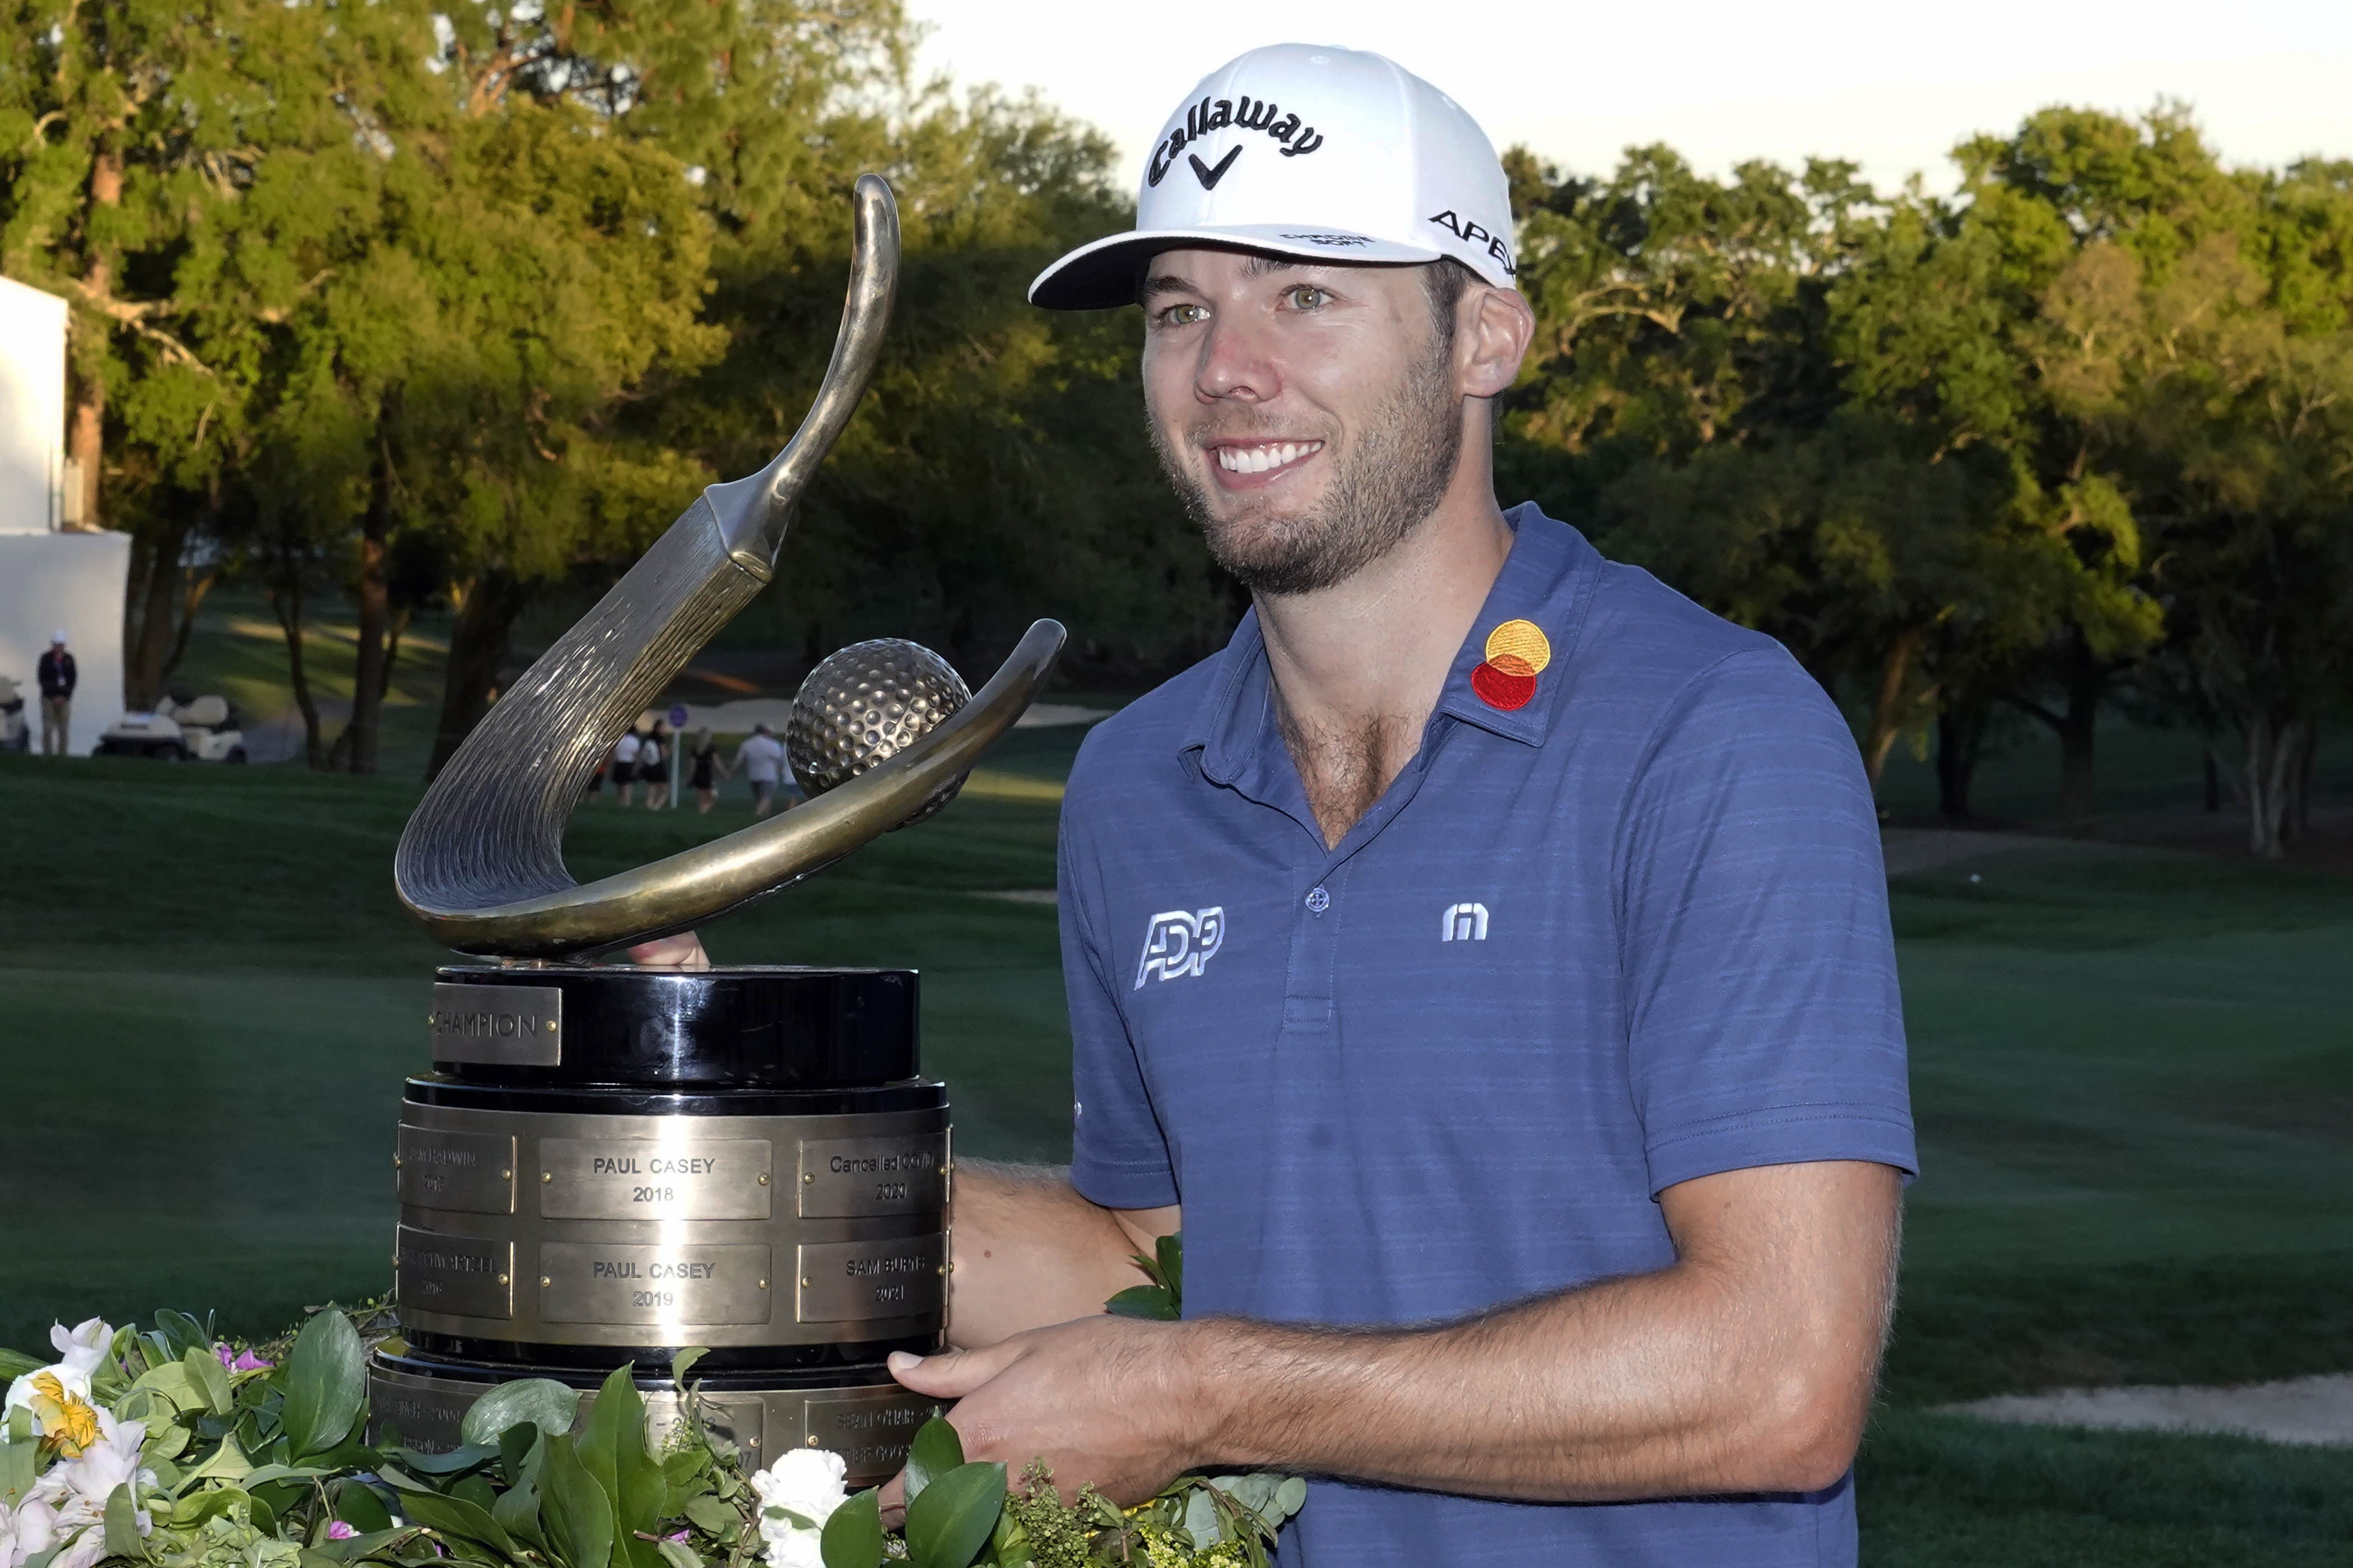 Burns repeats at Innisbrook after playoff win over Riley